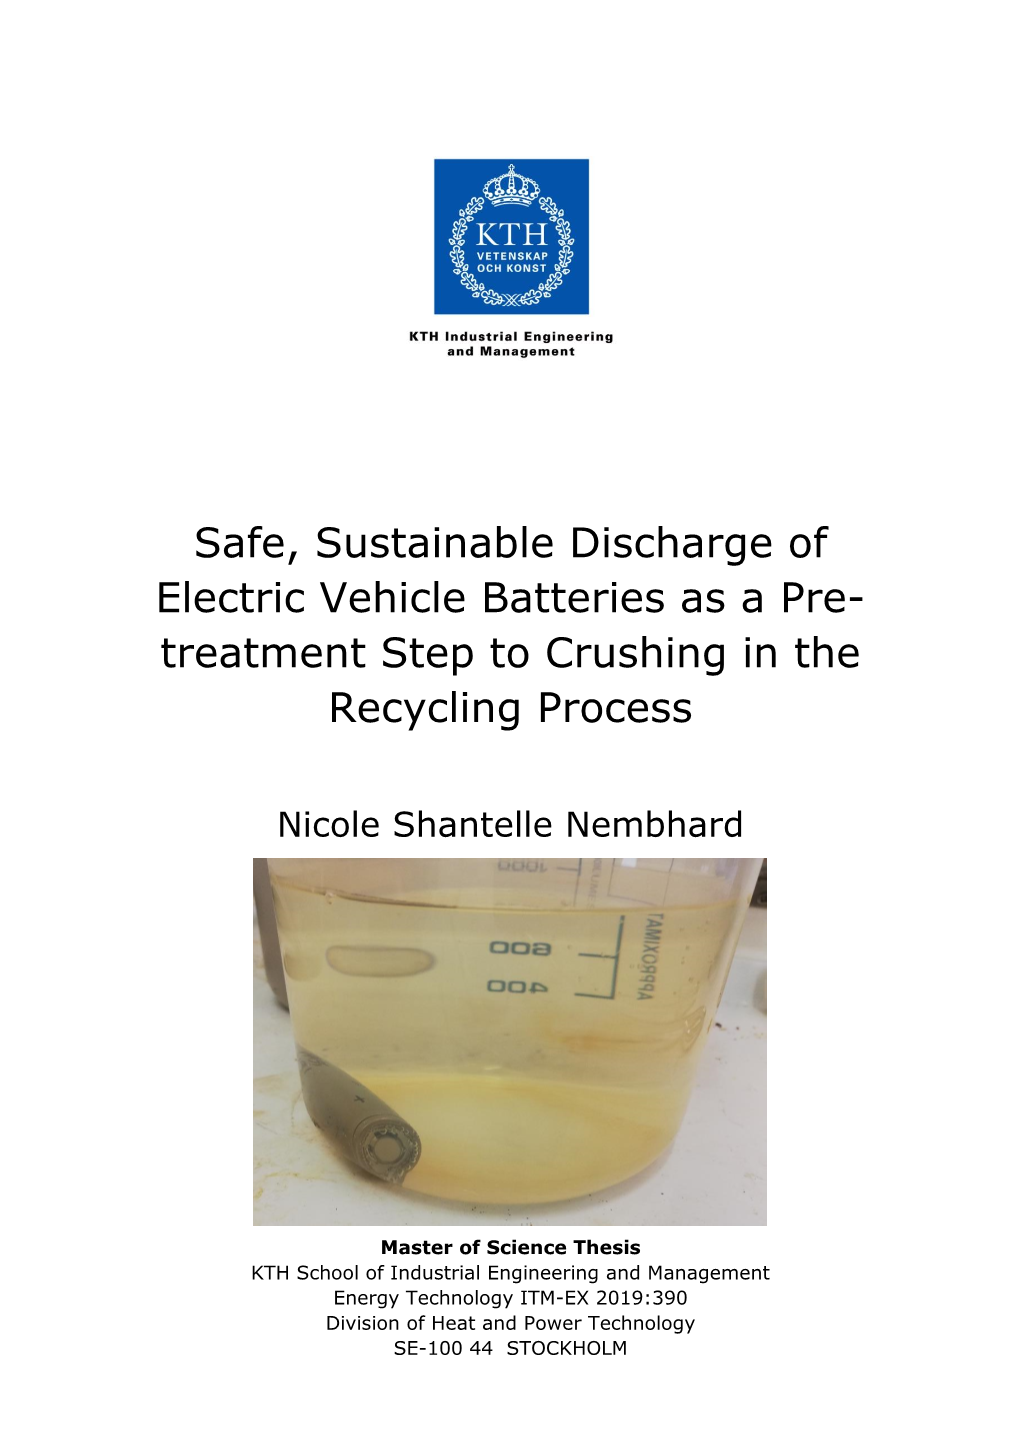 Safe, Sustainable Discharge of Electric Vehicle Batteries As a Pre- Treatment Step to Crushing in the Recycling Process